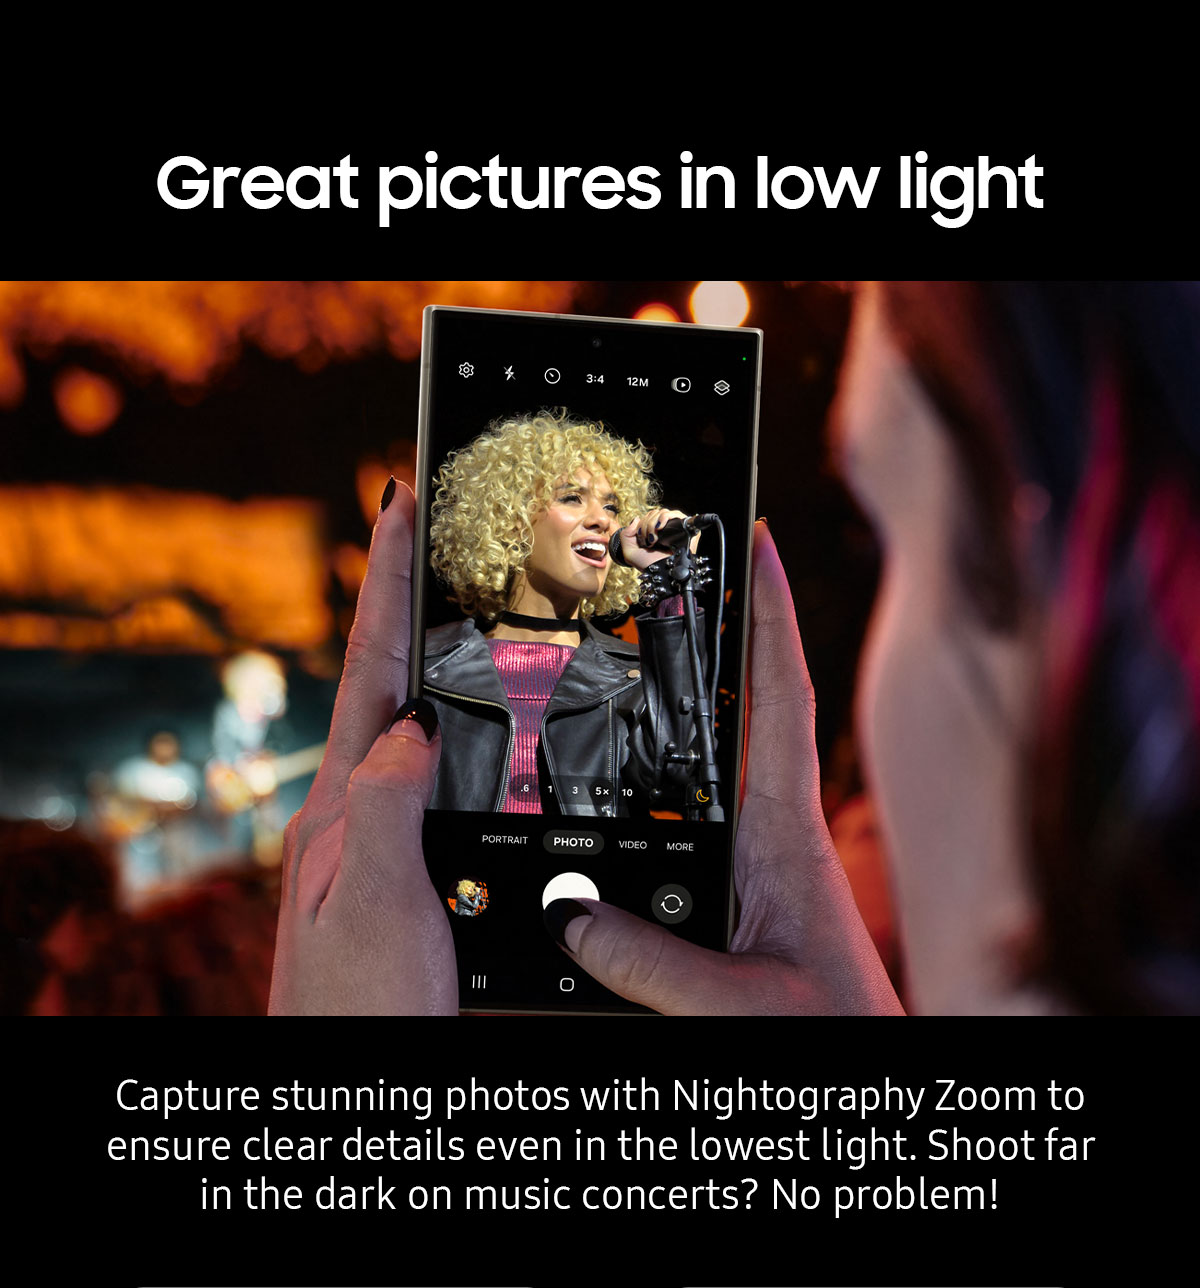 Great pictures in low light | Capture stunning photos with Nightography Zoom to ensure clear details even in the lowest light. Shoot far in the dark on music concerts? No problem!